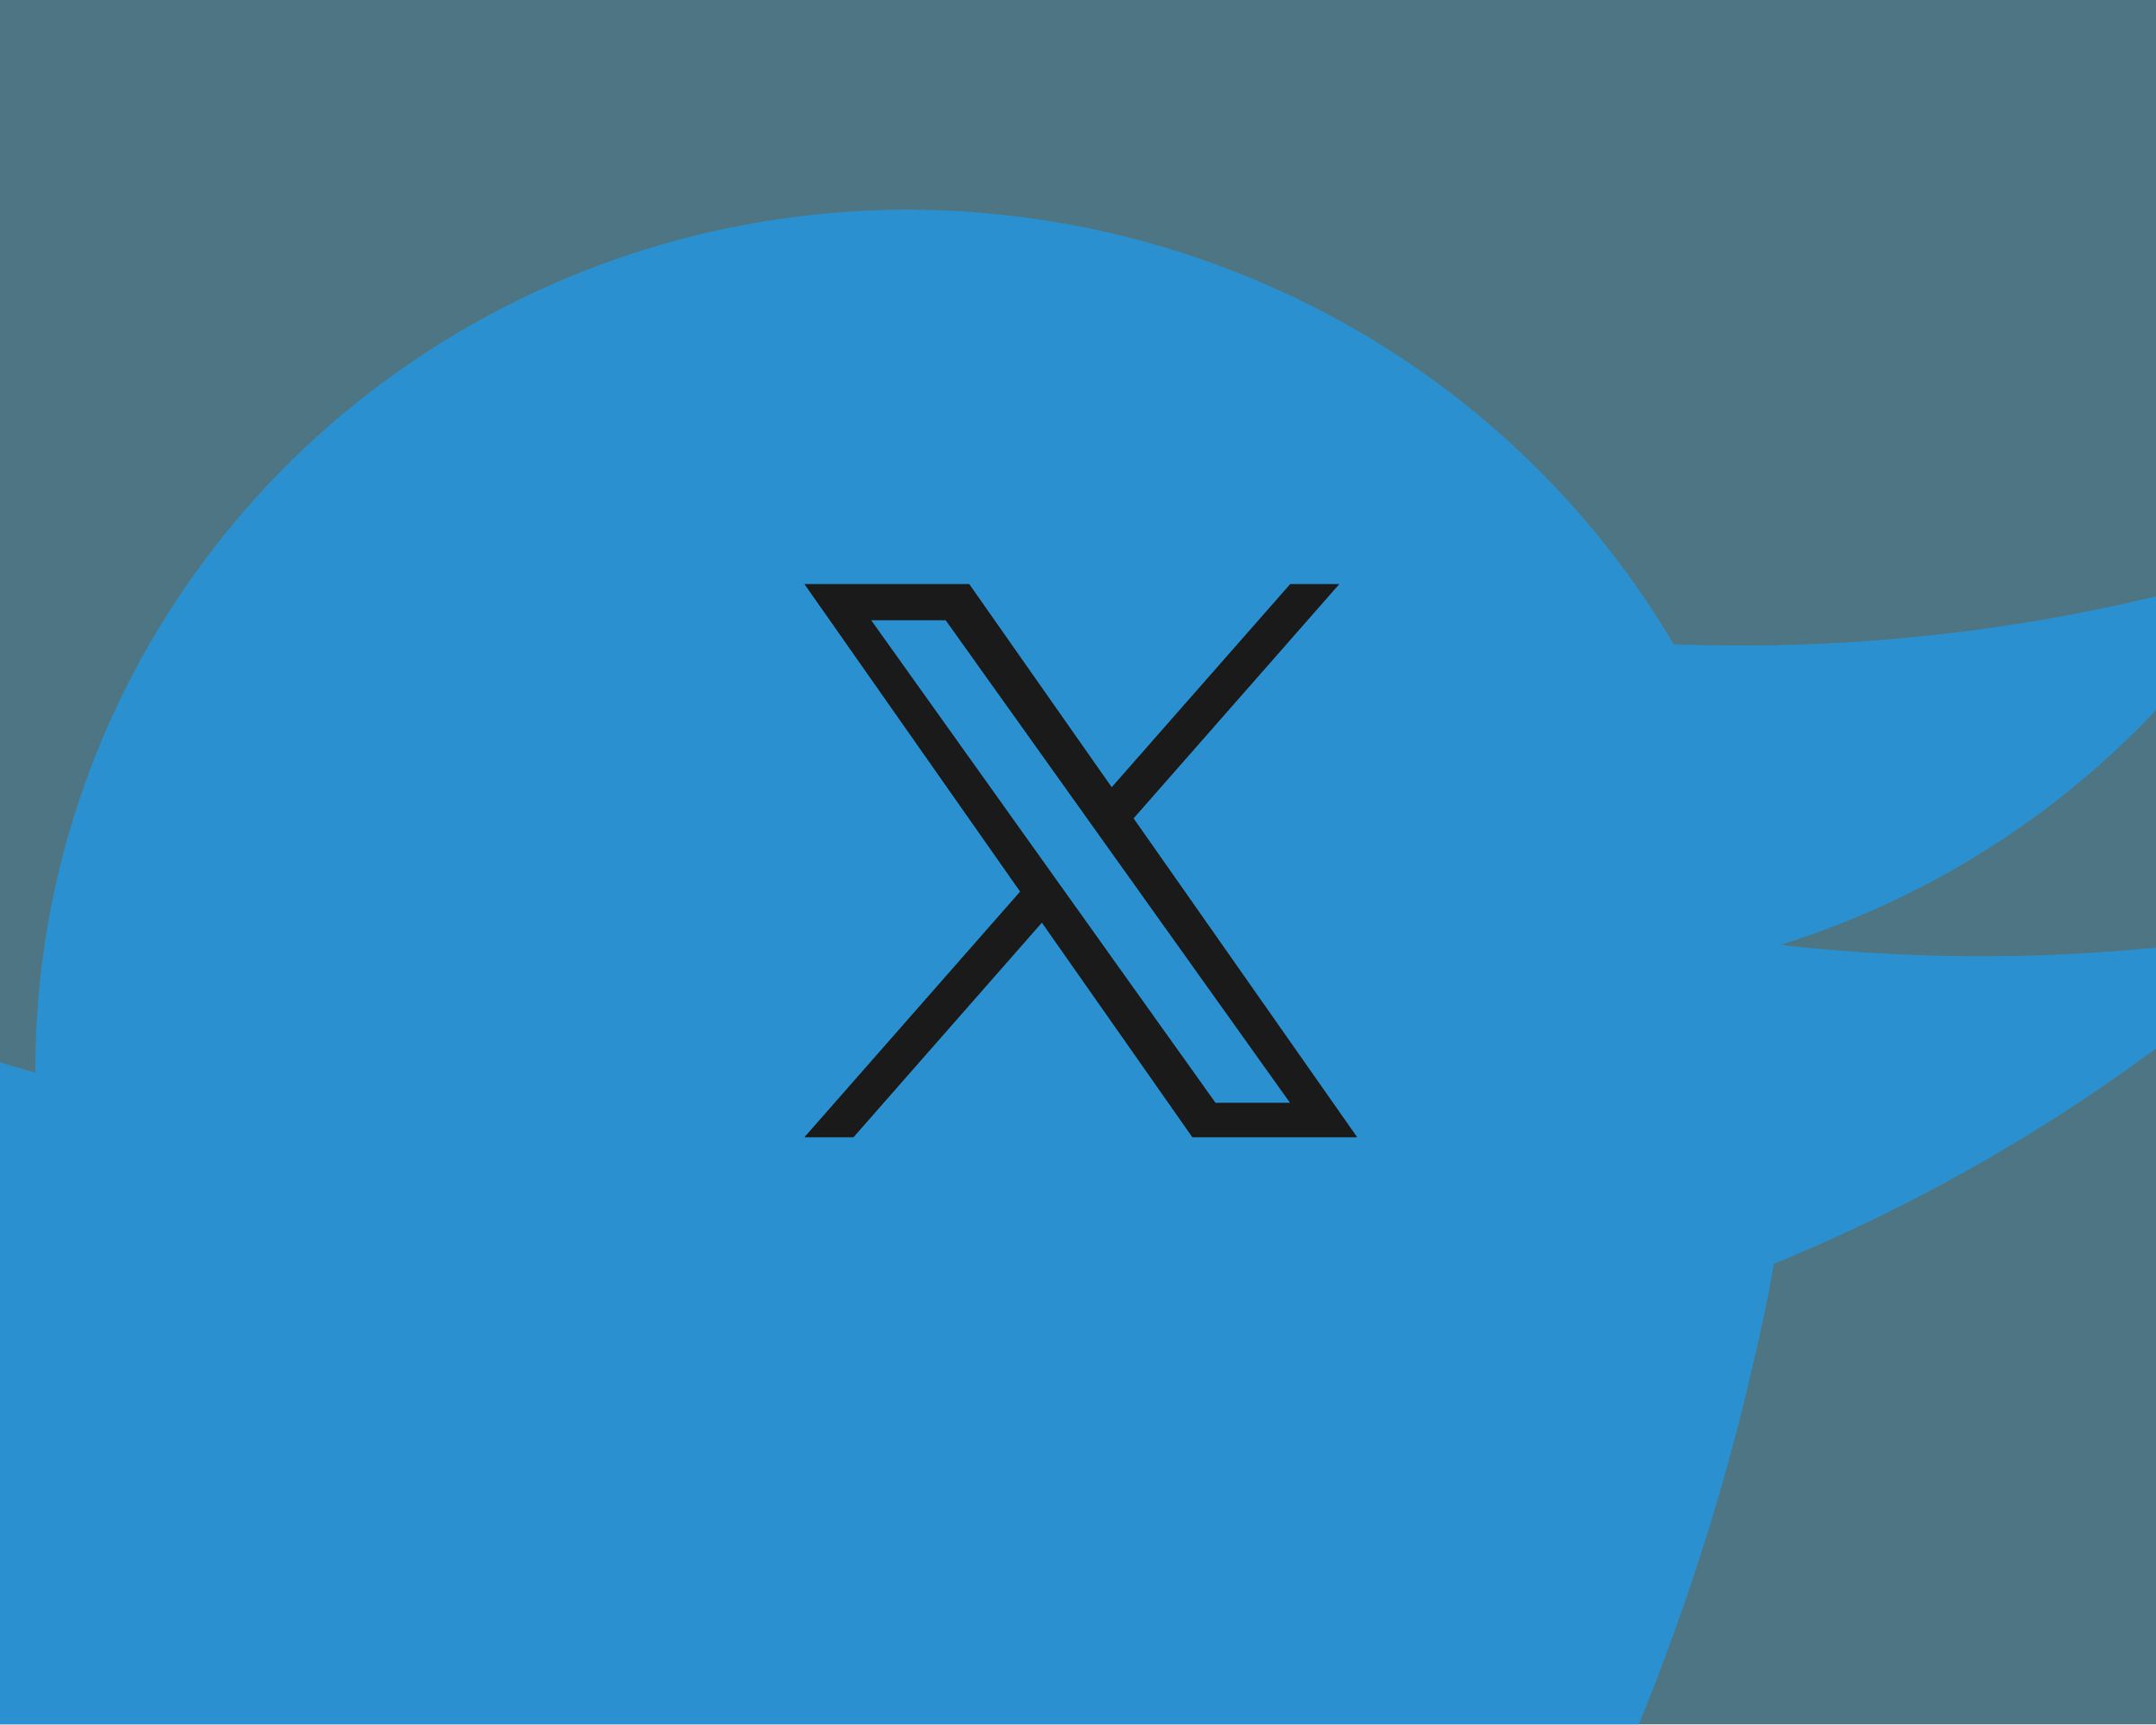 An image showing the former Twitter logo with the X logo on its head